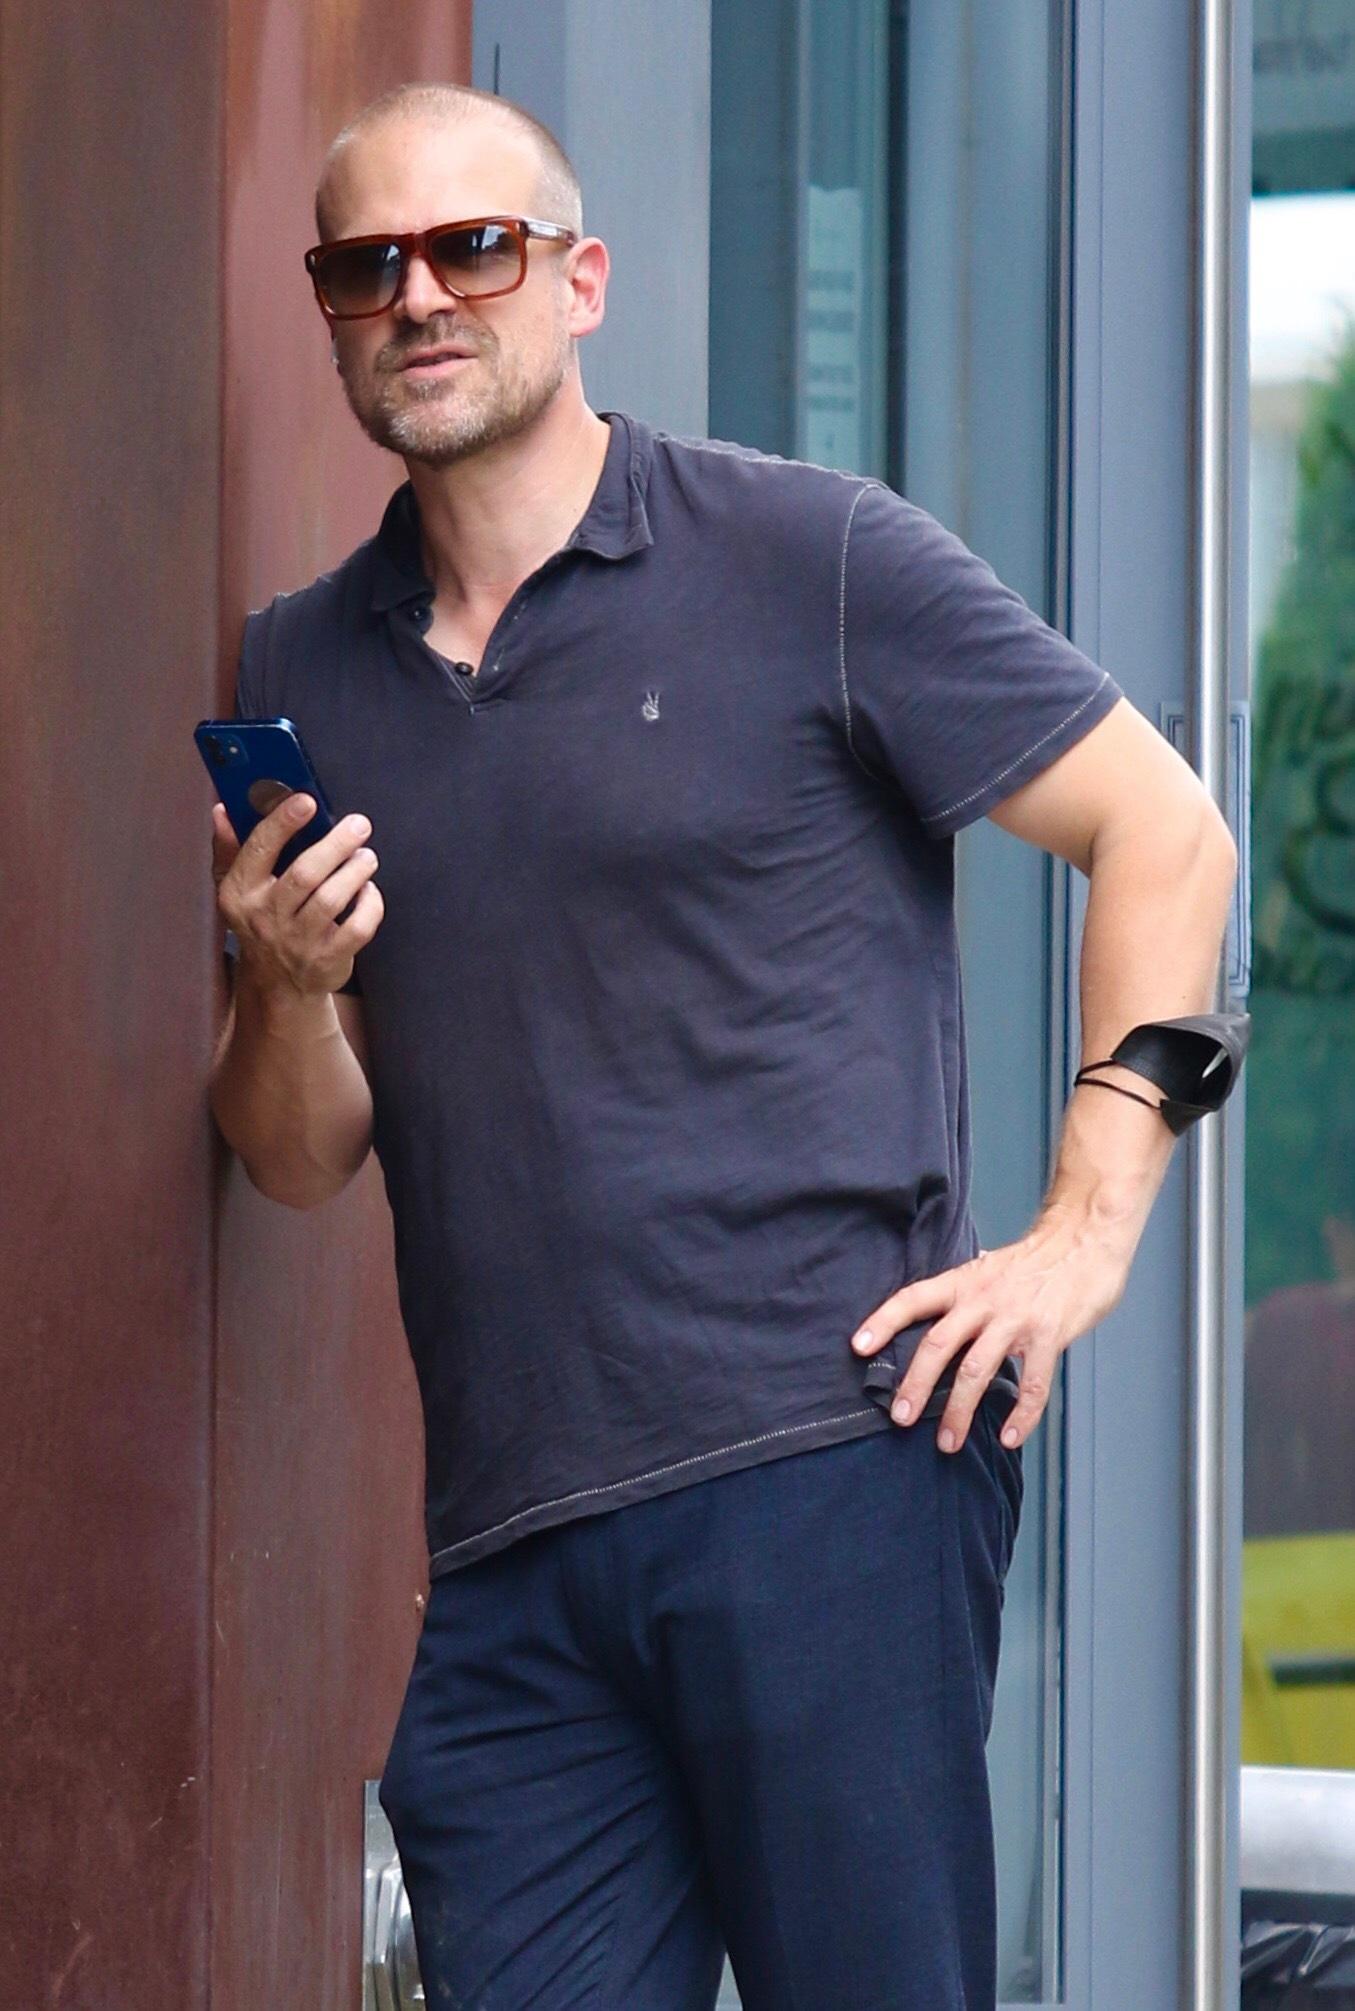 Stranger Things and Upcoming Black Widow star David Harbour looks busy on the phone after having lunch in NYC.